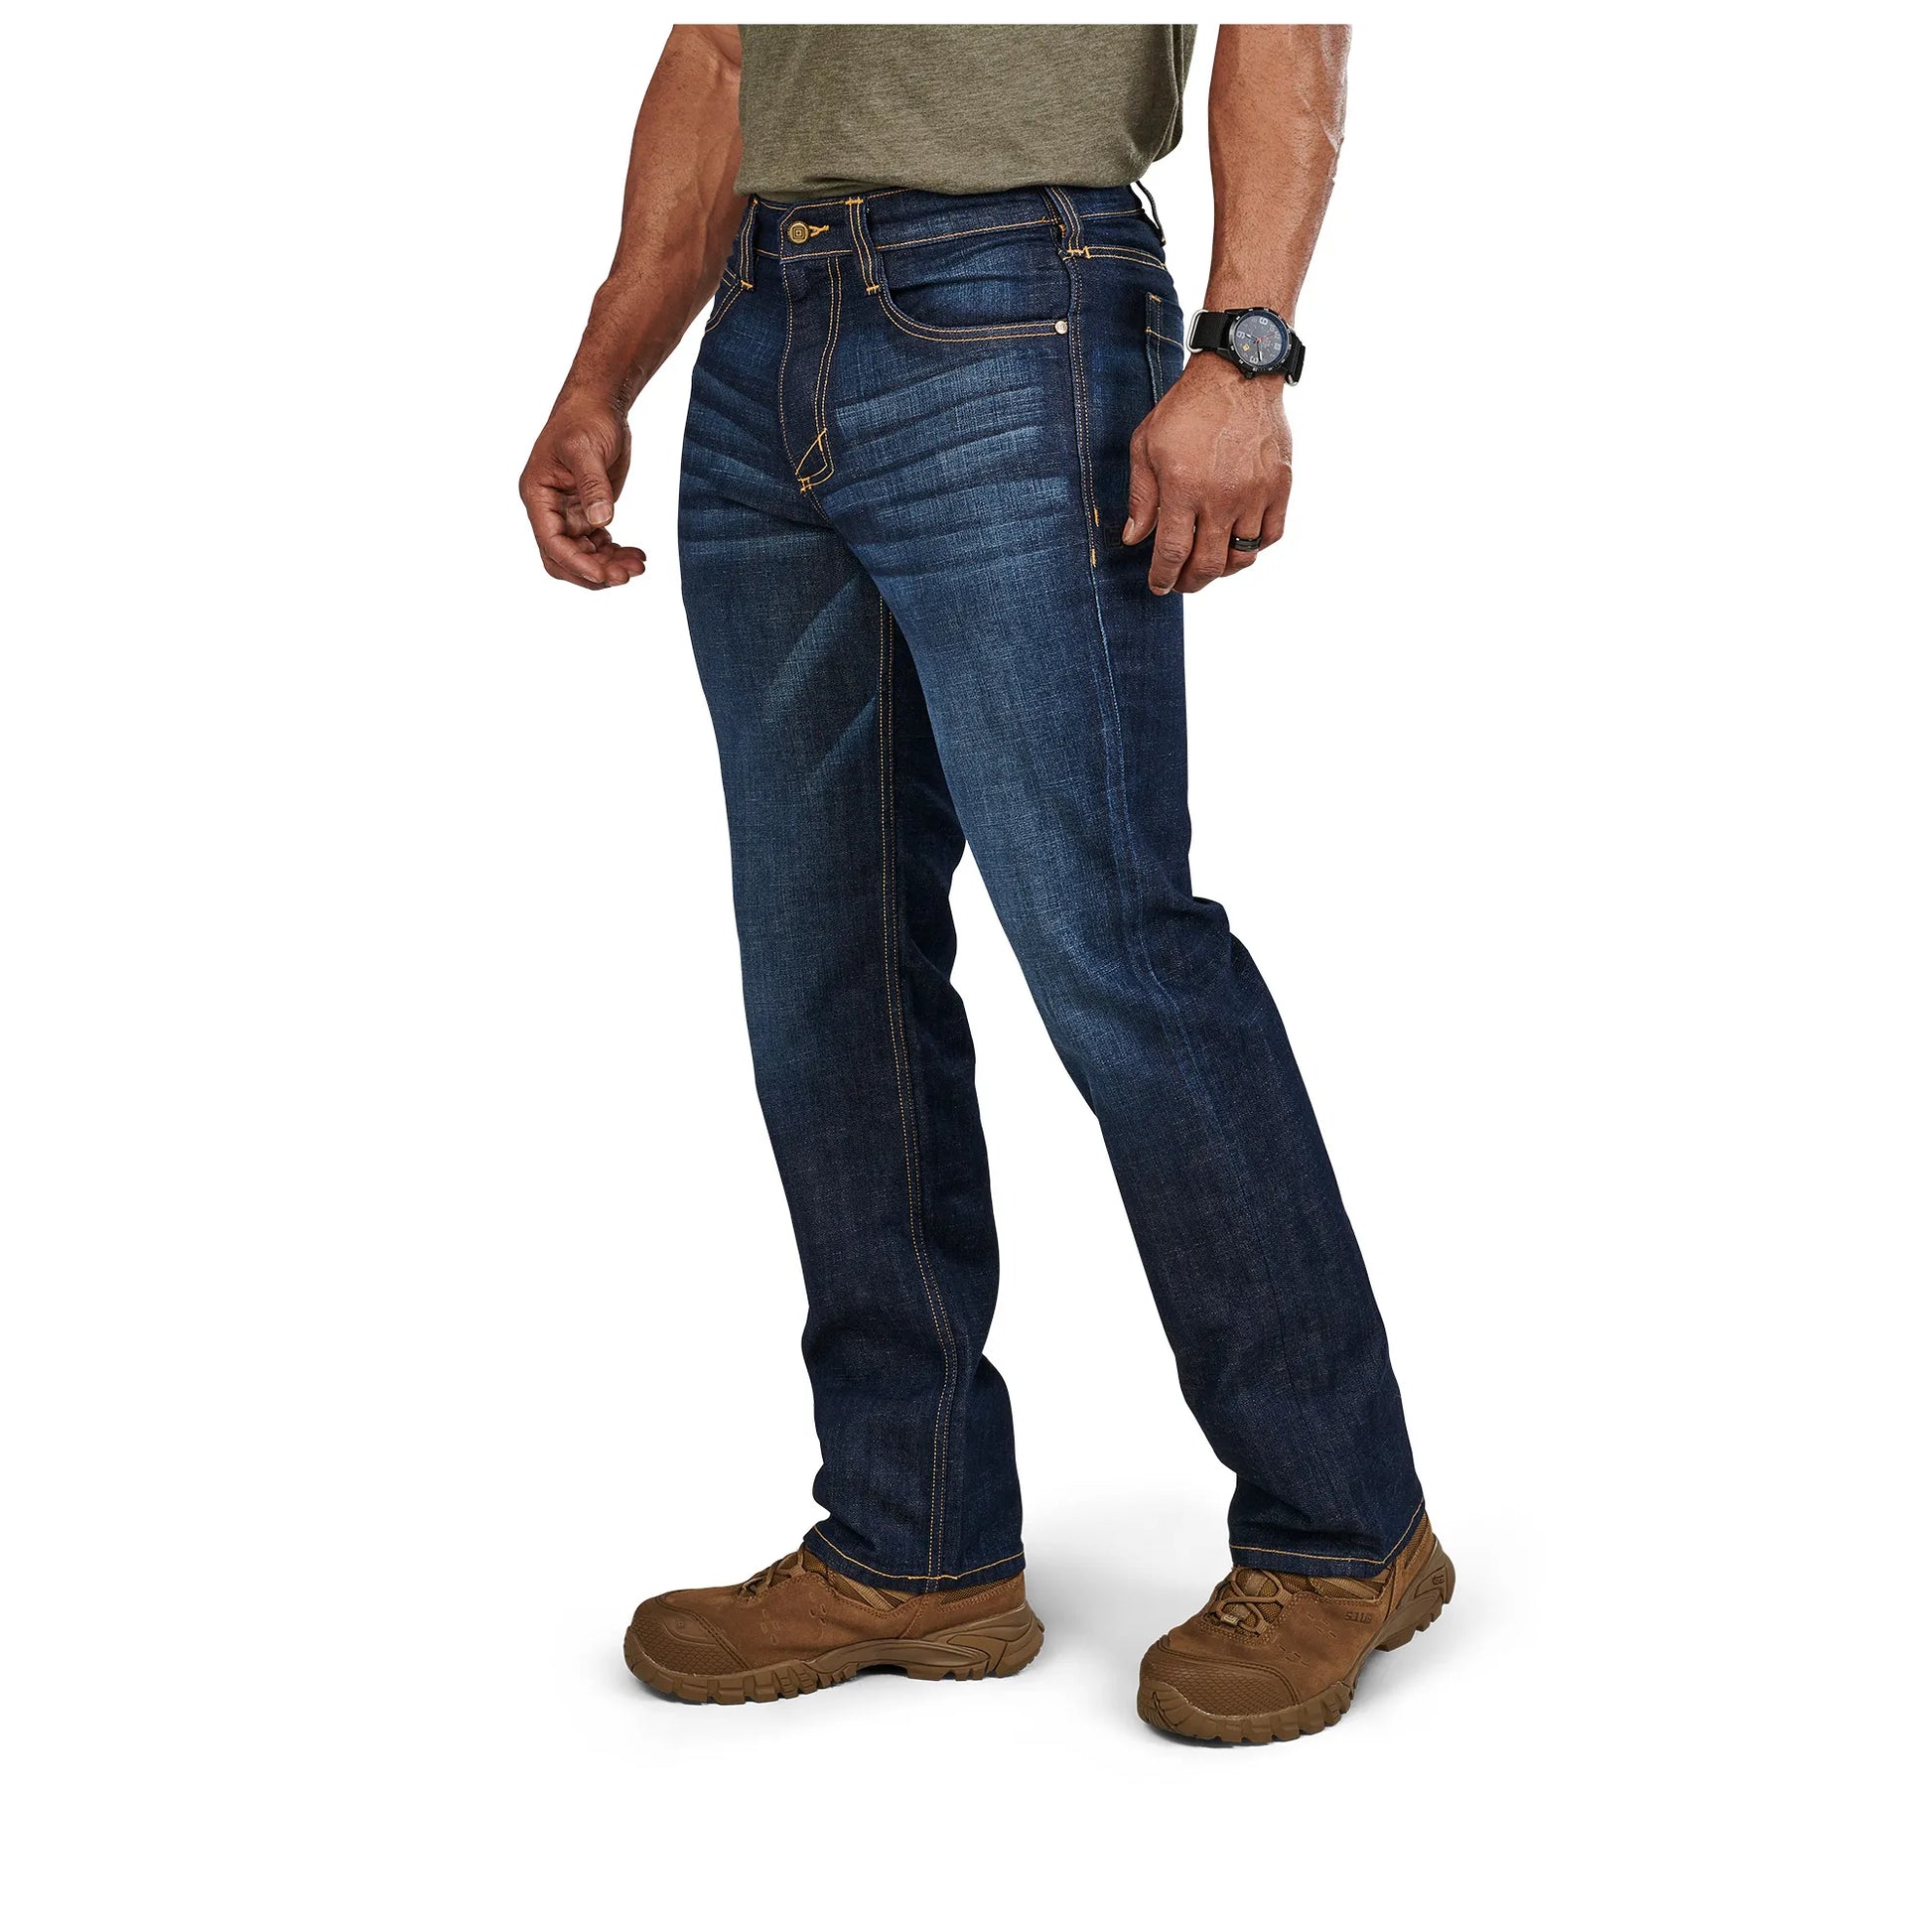 5.11 Tactical Defender-Flex Straight Fit Jean – Army Navy Marine Store